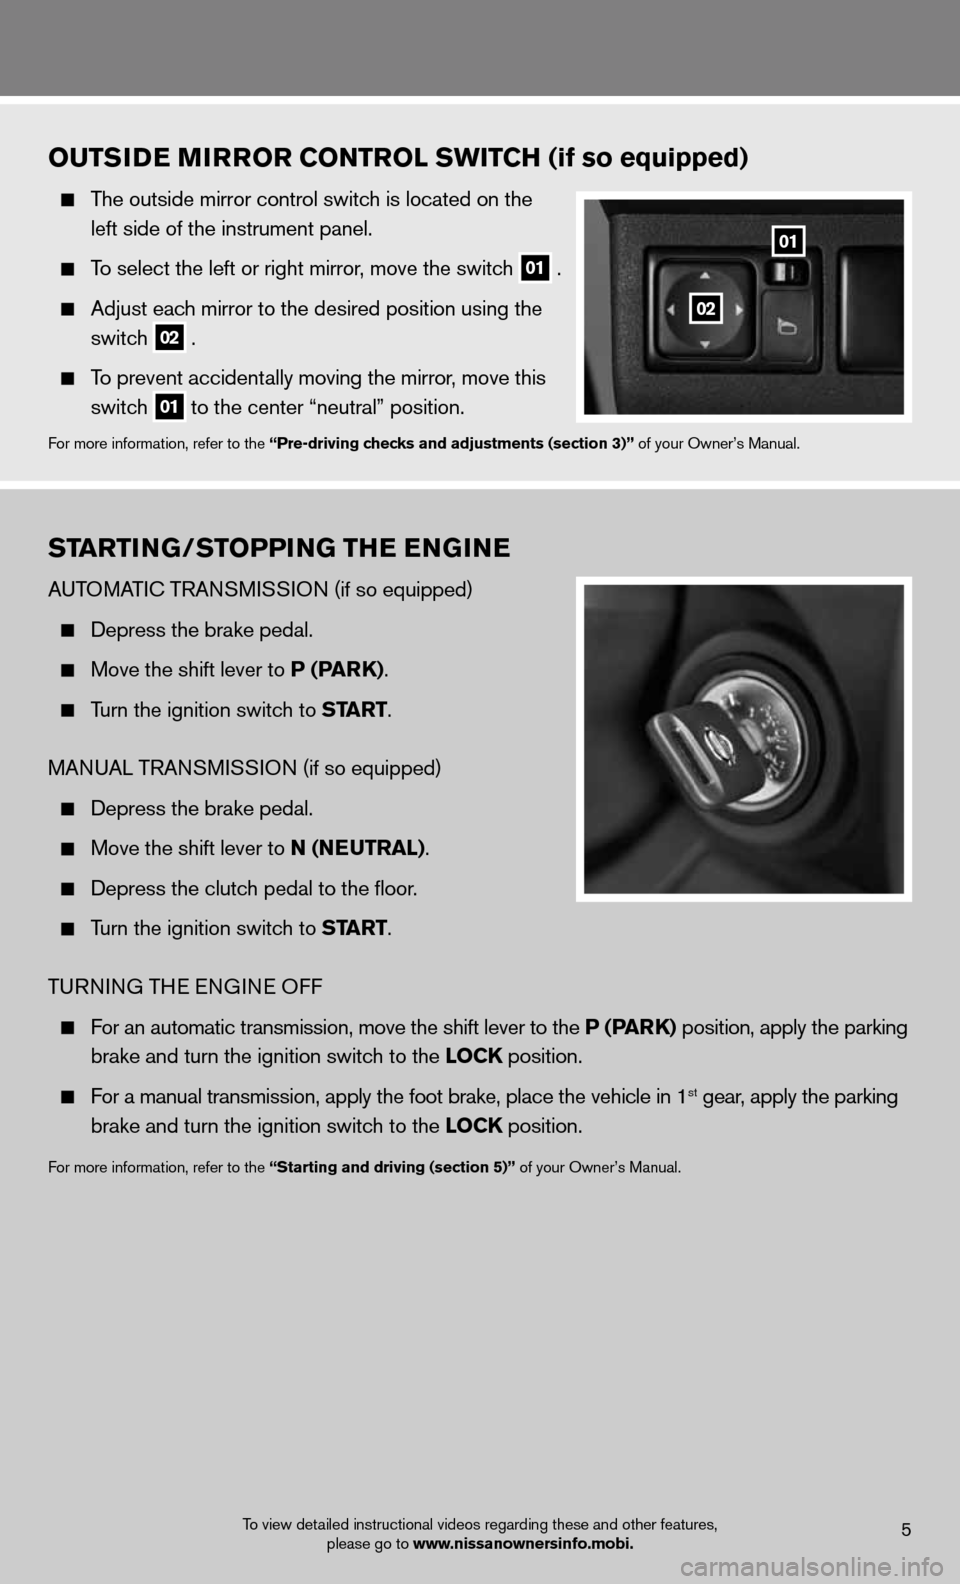 NISSAN XTERRA 2012 N50 / 2.G Quick Reference Guide startinG/stoPPin G tHE EnG in E
AuTOMATic TRAn SMiSS iO n (if so equipped)  
 
  Depress the brake pedal.   
 
  Move the shift lever to P (P arK). 
 
  Turn the ignition switch to start. 
 
MAnu AL T